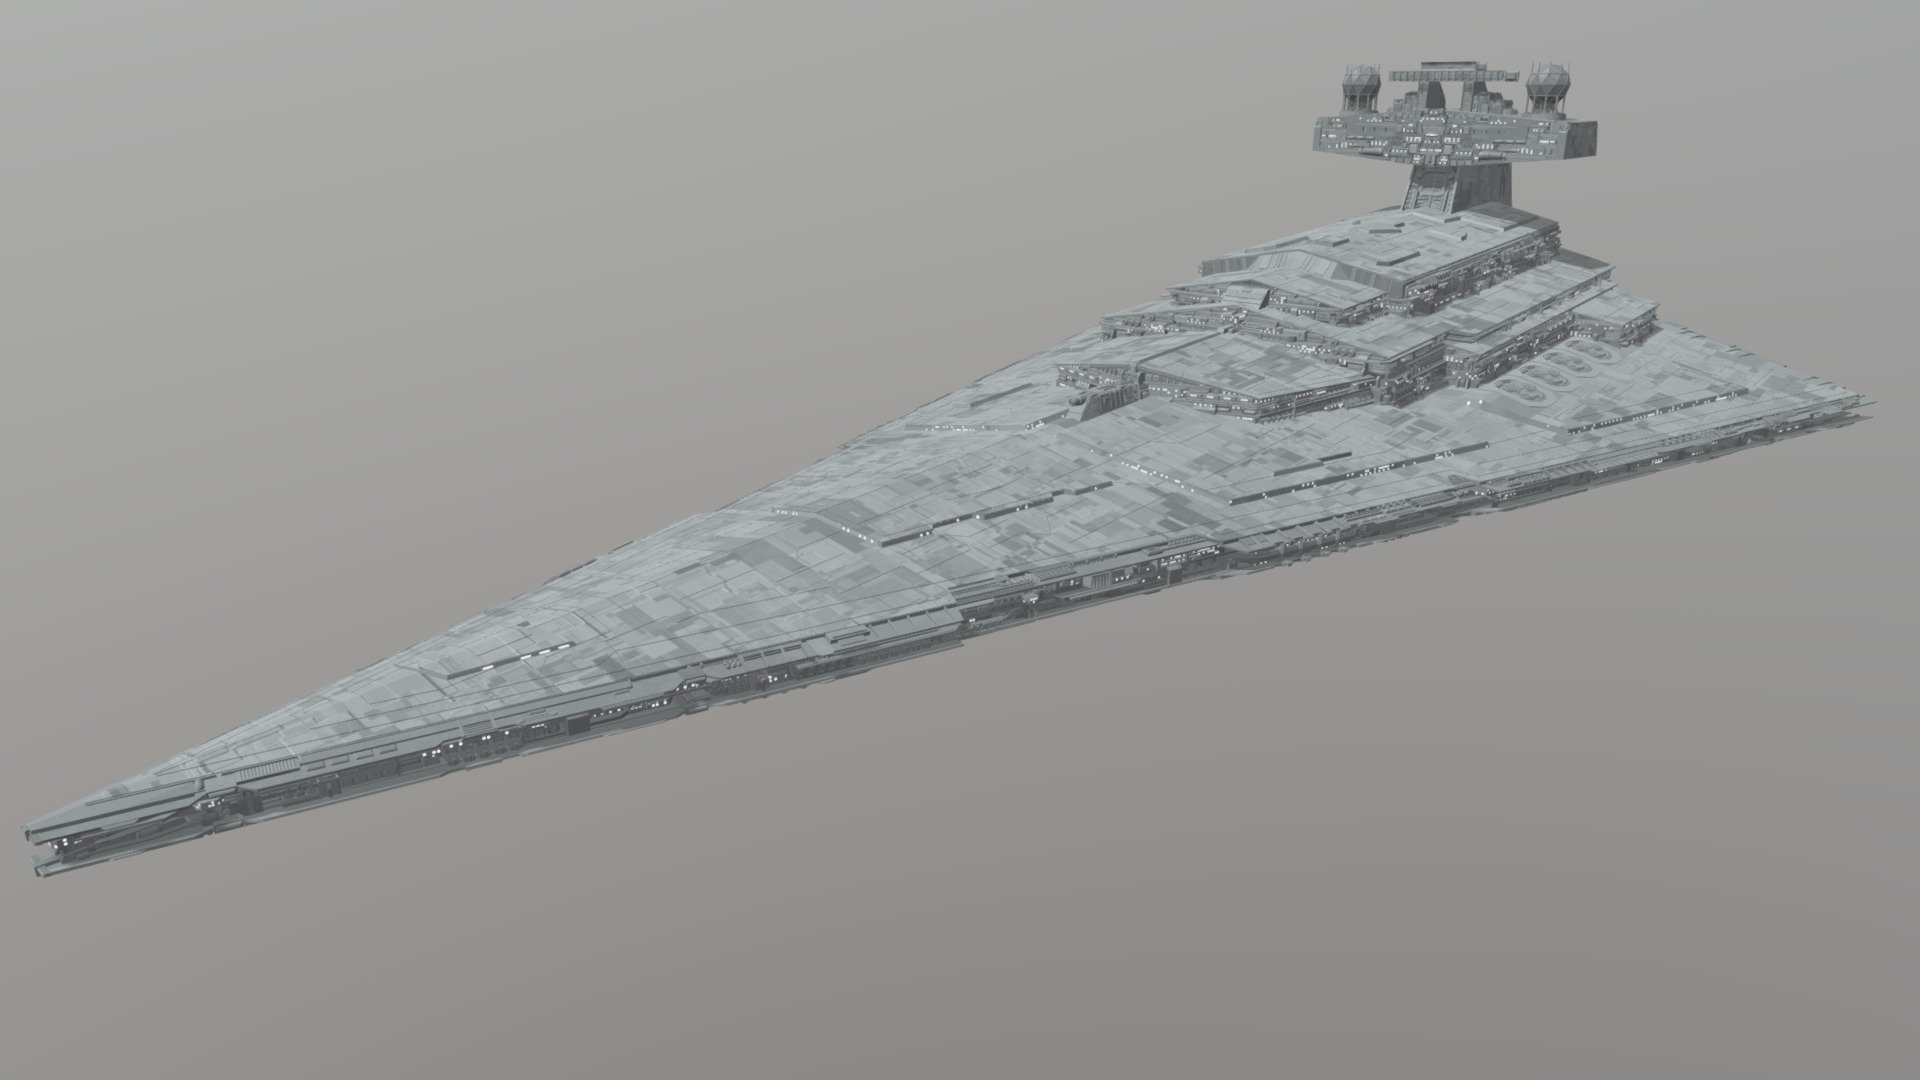 The Imperial-Class Star Destroyer of the Galactic Empire. If i remember correctly, this was also Darth Vader's personal flagship at one point (the Devastator).

As seen from my Reddit post;
https://www.reddit.com/r/blender/comments/u3baof/imperialclass_star_destroyer_from_star_wars_that/

As with my other star wars ships, this model was also modelled and textured in Blender and Microsoft Paint. JSPlacement was also used when creating the hull plating texture.

Edit; I was told that there were apparently 2 variants of this star destroyer; the imperial-I class, and the imperial-II class. I was also told that the one I have here resembles the imperial-II variant, but since I don't know the differences between variants, I don't really know.

Feel free to use this model for any of your personal projects! - Star Wars; Imperial-Class Star Destroyer - Download Free 3D model by Heataker 3d model